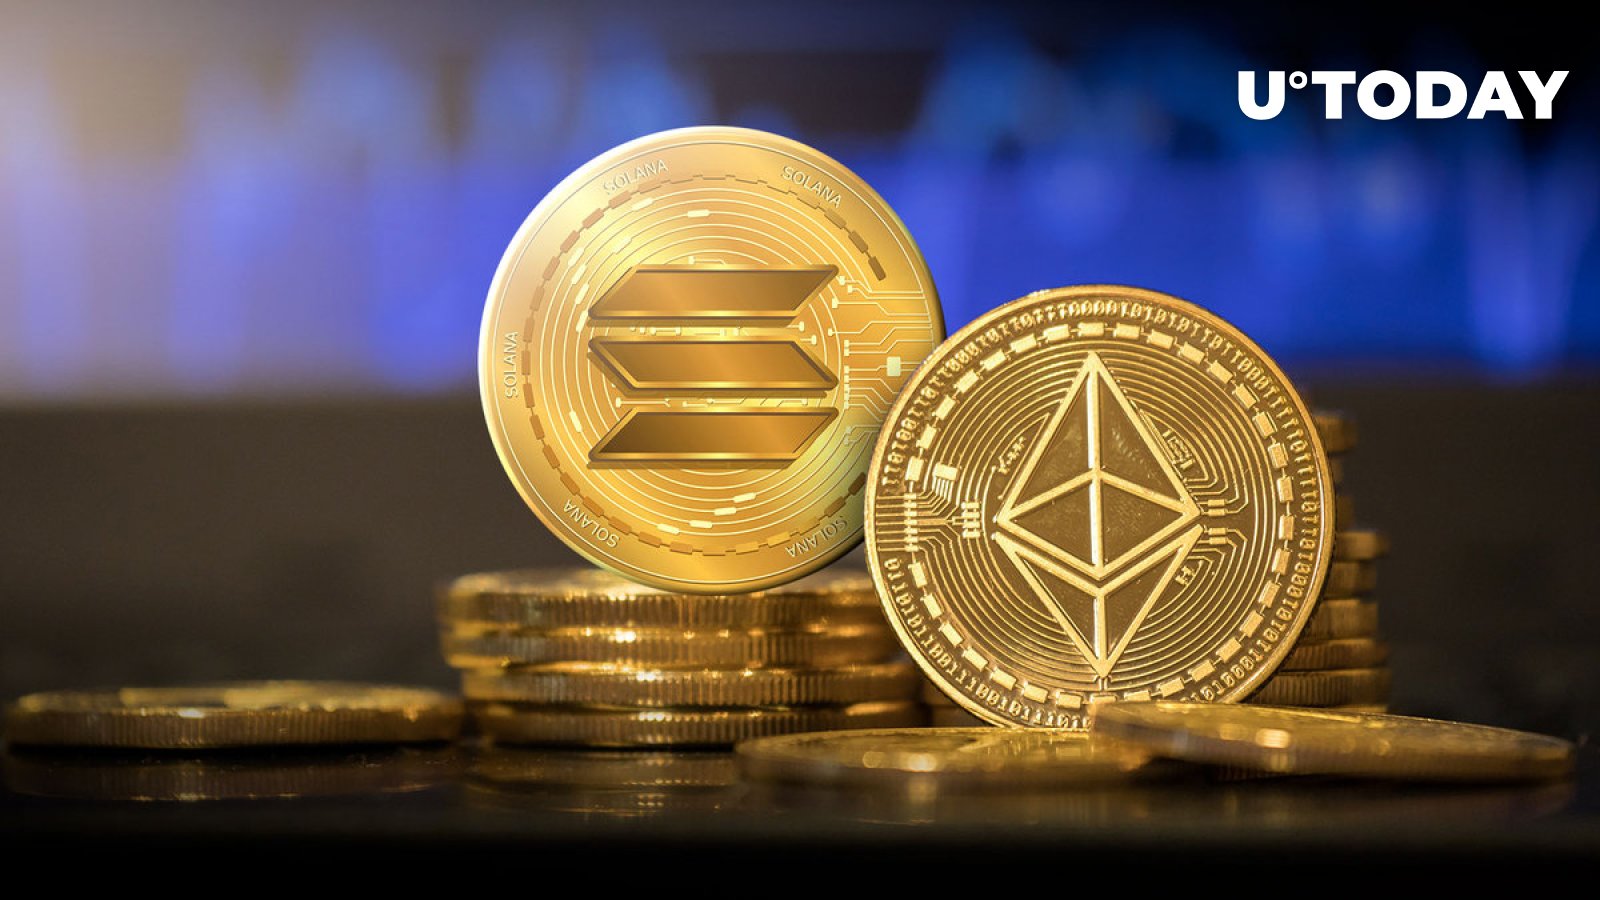 Solana (SOL) Is Just as Ethereum (ETH): Here’s How